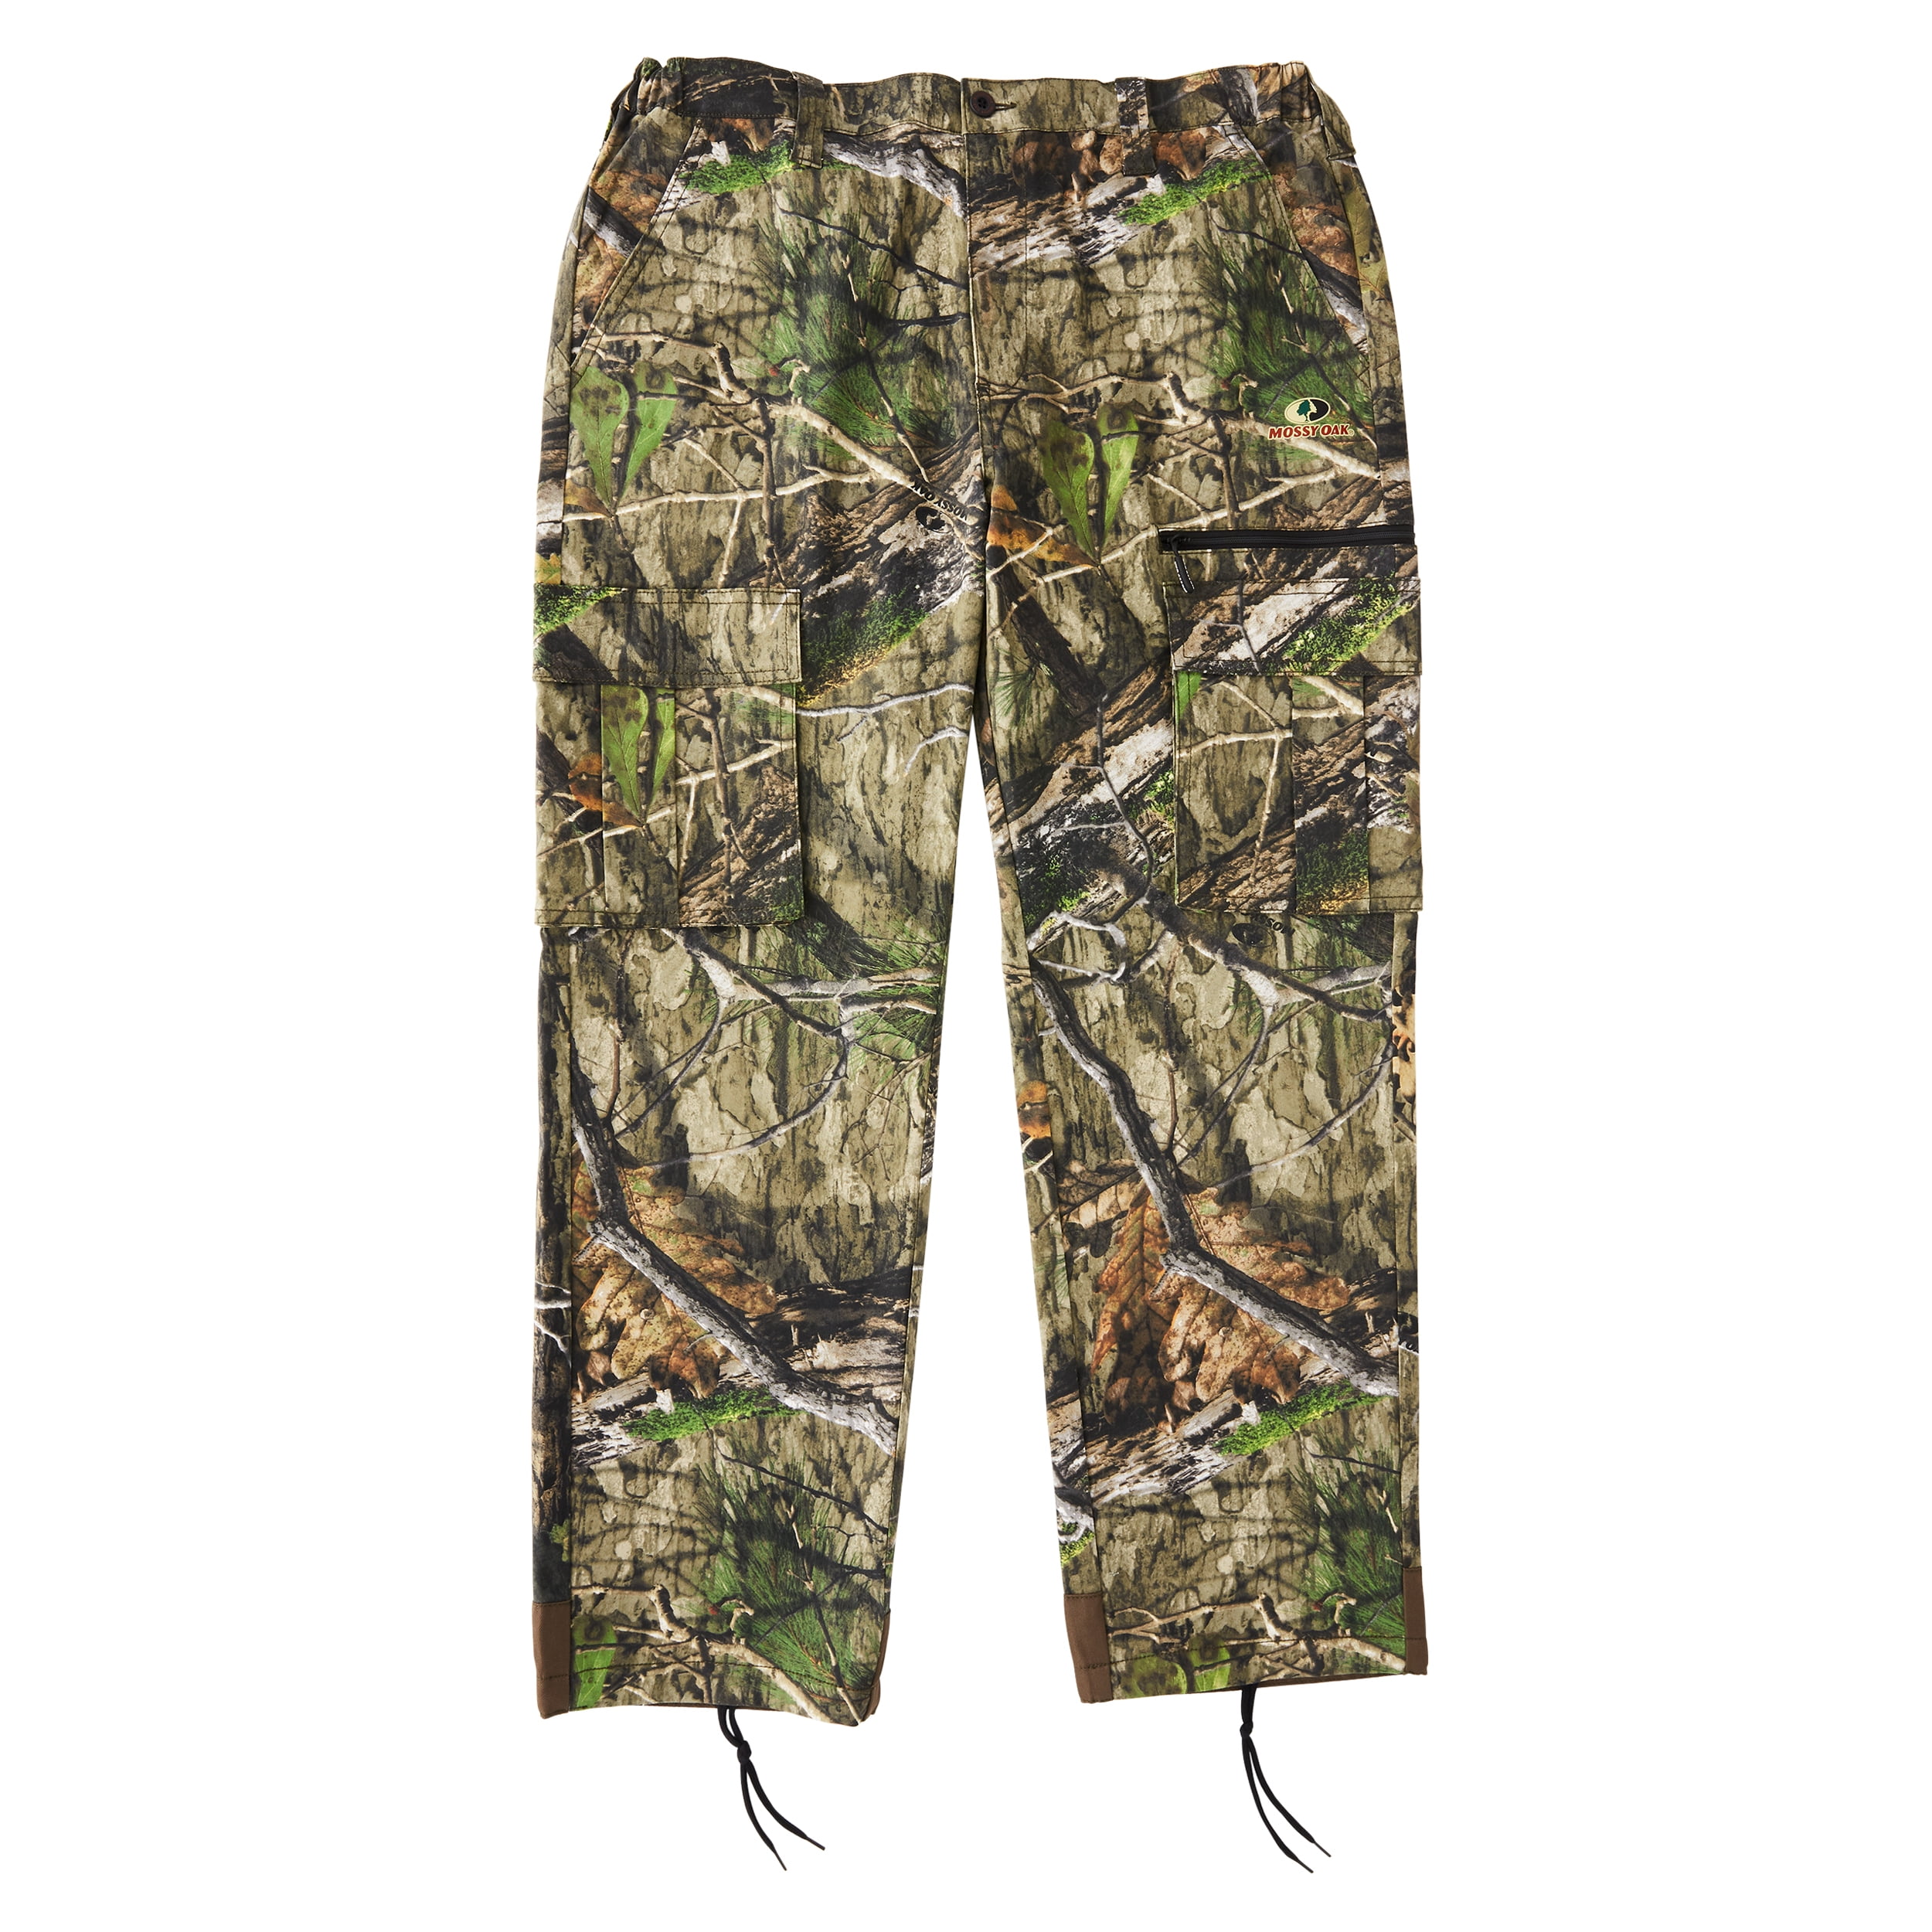 Mossy Oak® Country DNA™ Men's Relaxed Fit Camo Cargo Pant, Medium